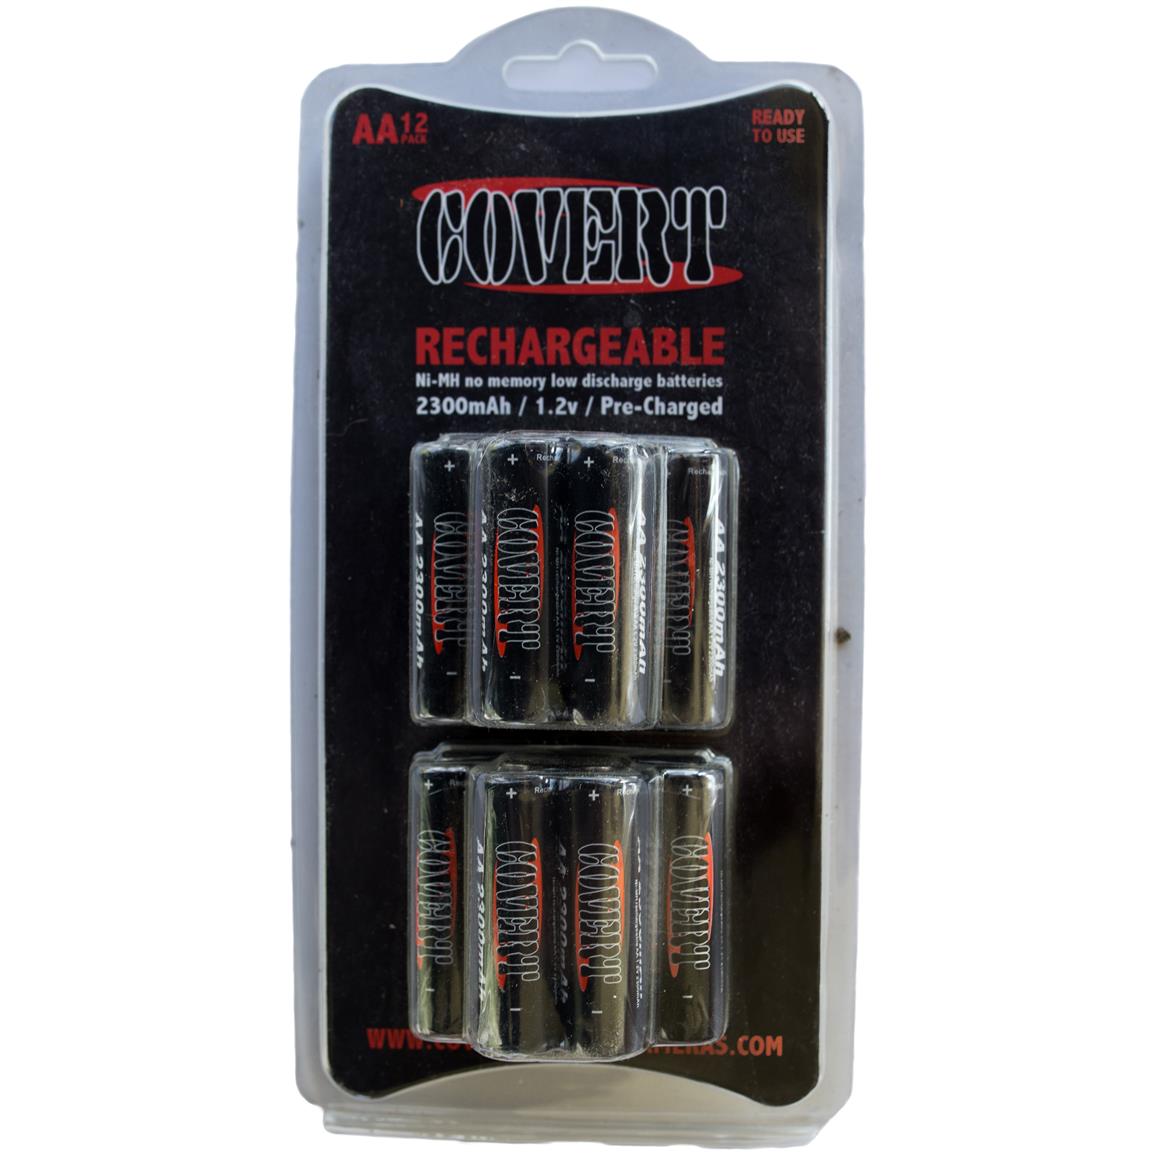 Covert AA Rechargeable NiMH Batteries, 12 Pack